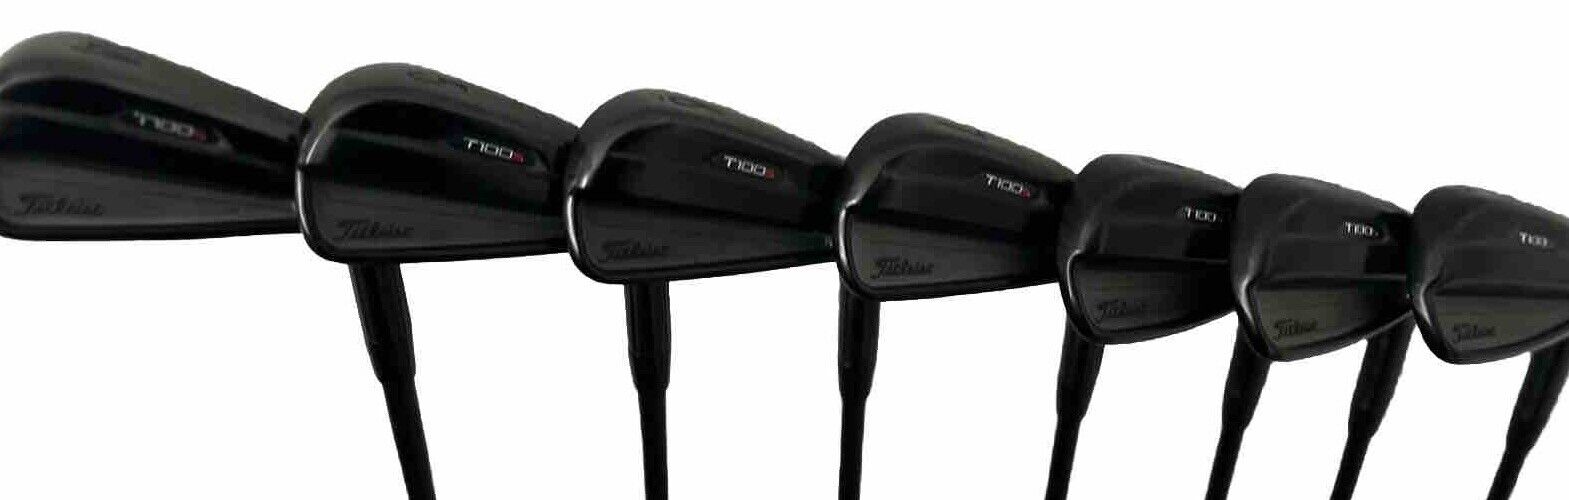 Titleist T100s Special Edition Black Iron Set